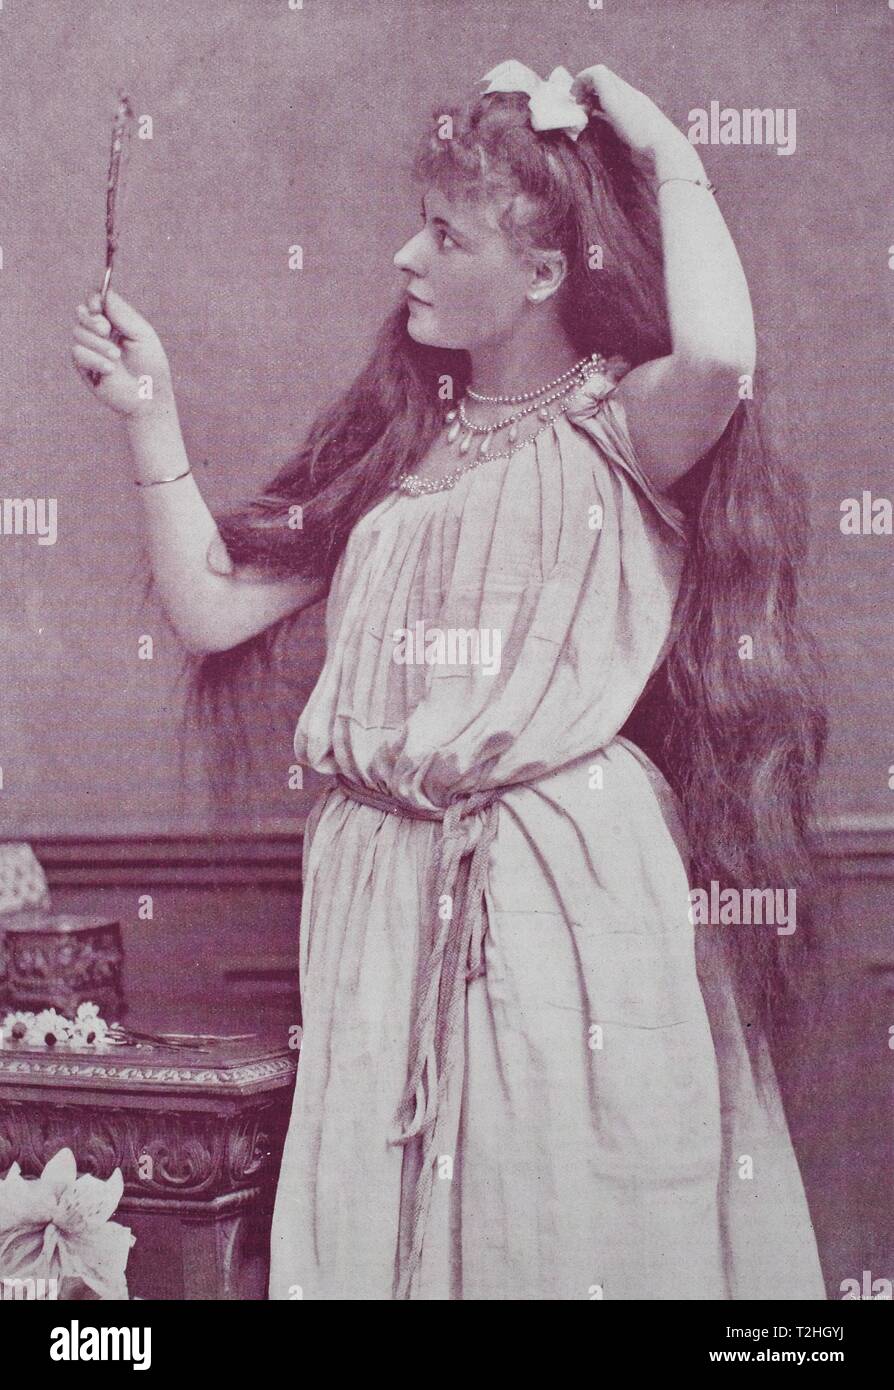 Girl with very long hair looks in a hand mirror, 1895, historical illustration, Germany Stock Photo